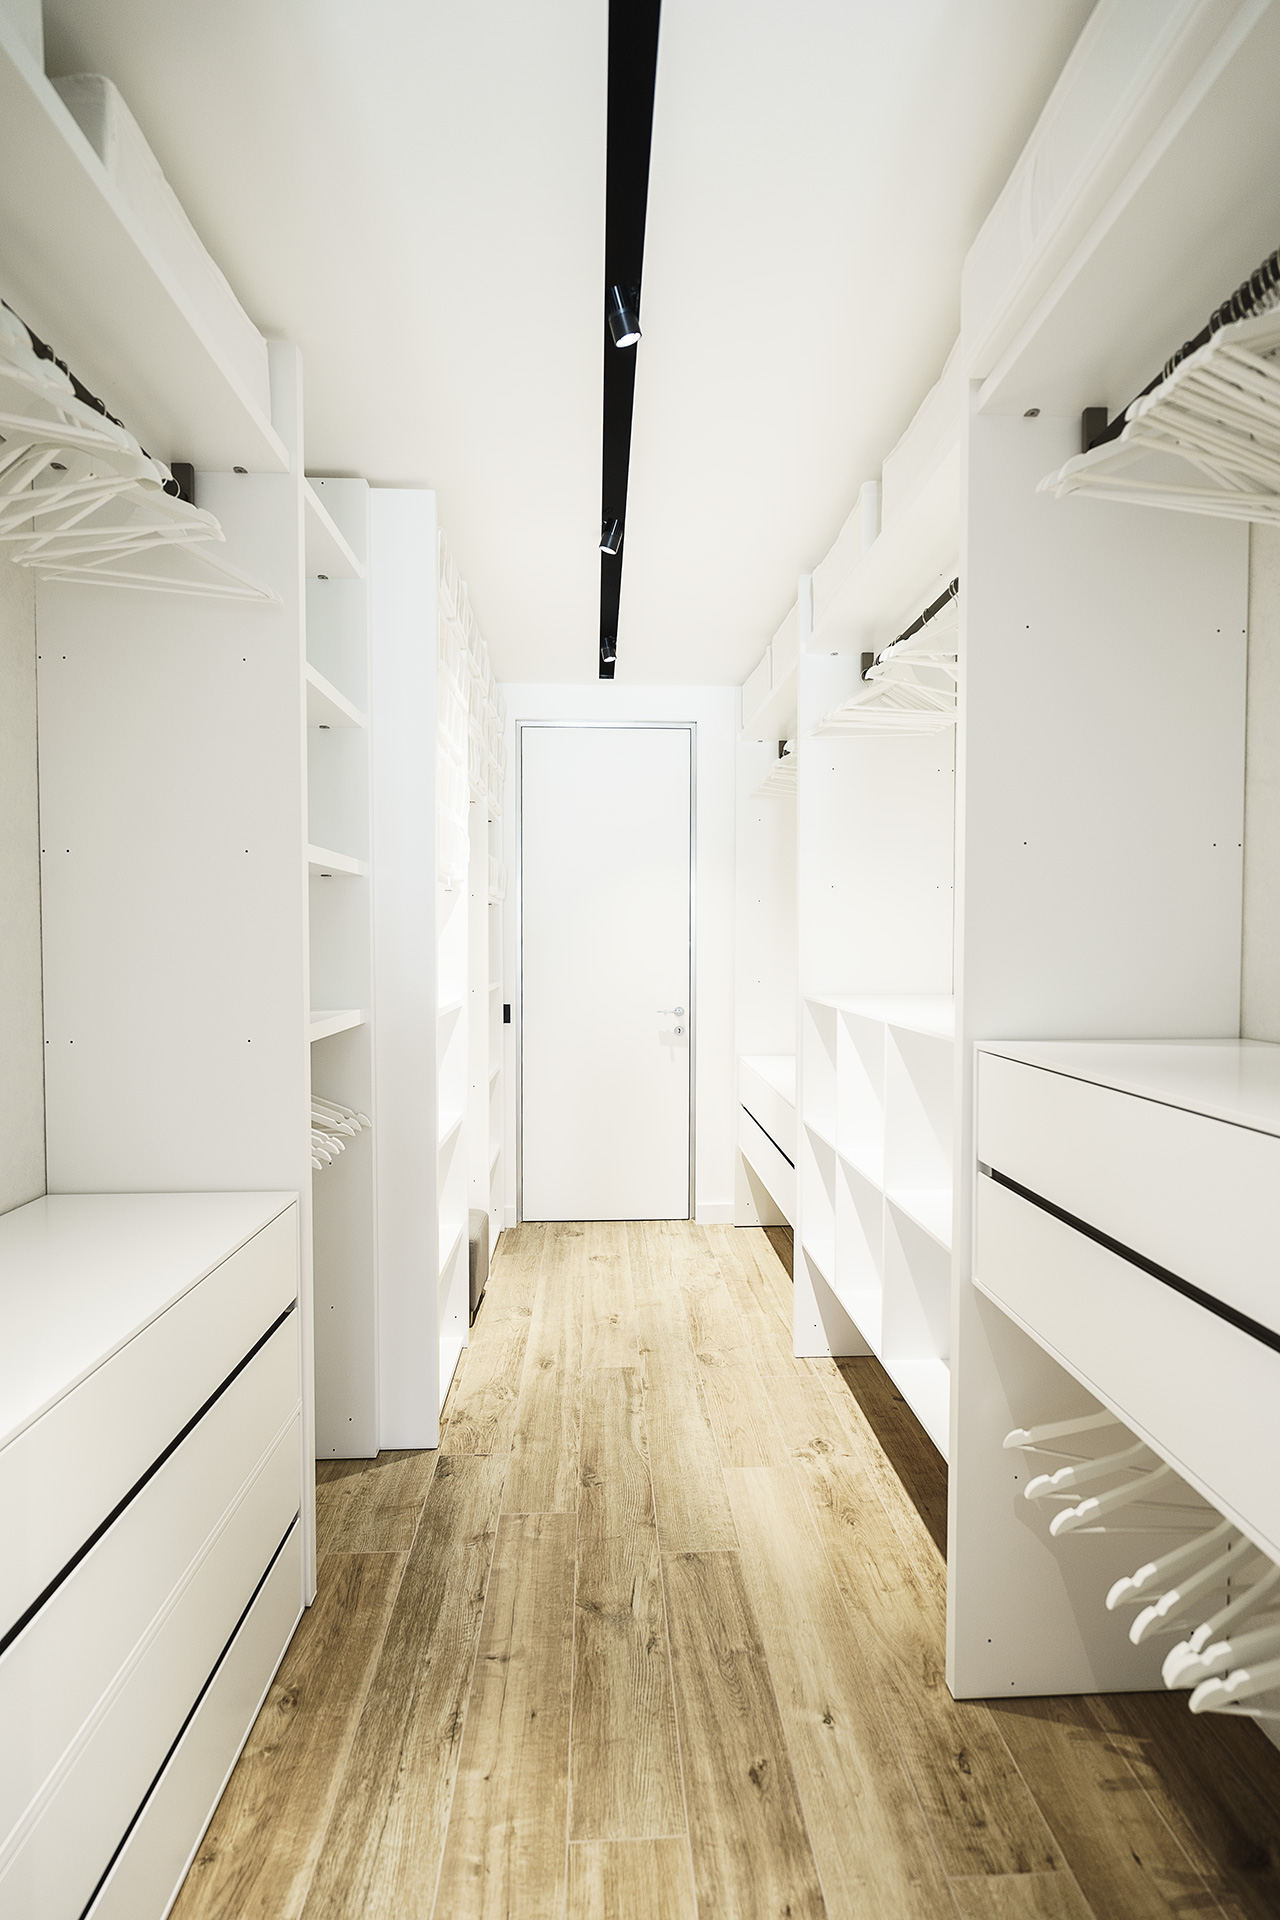 The closet is spacious and well organized, it's done in pure white